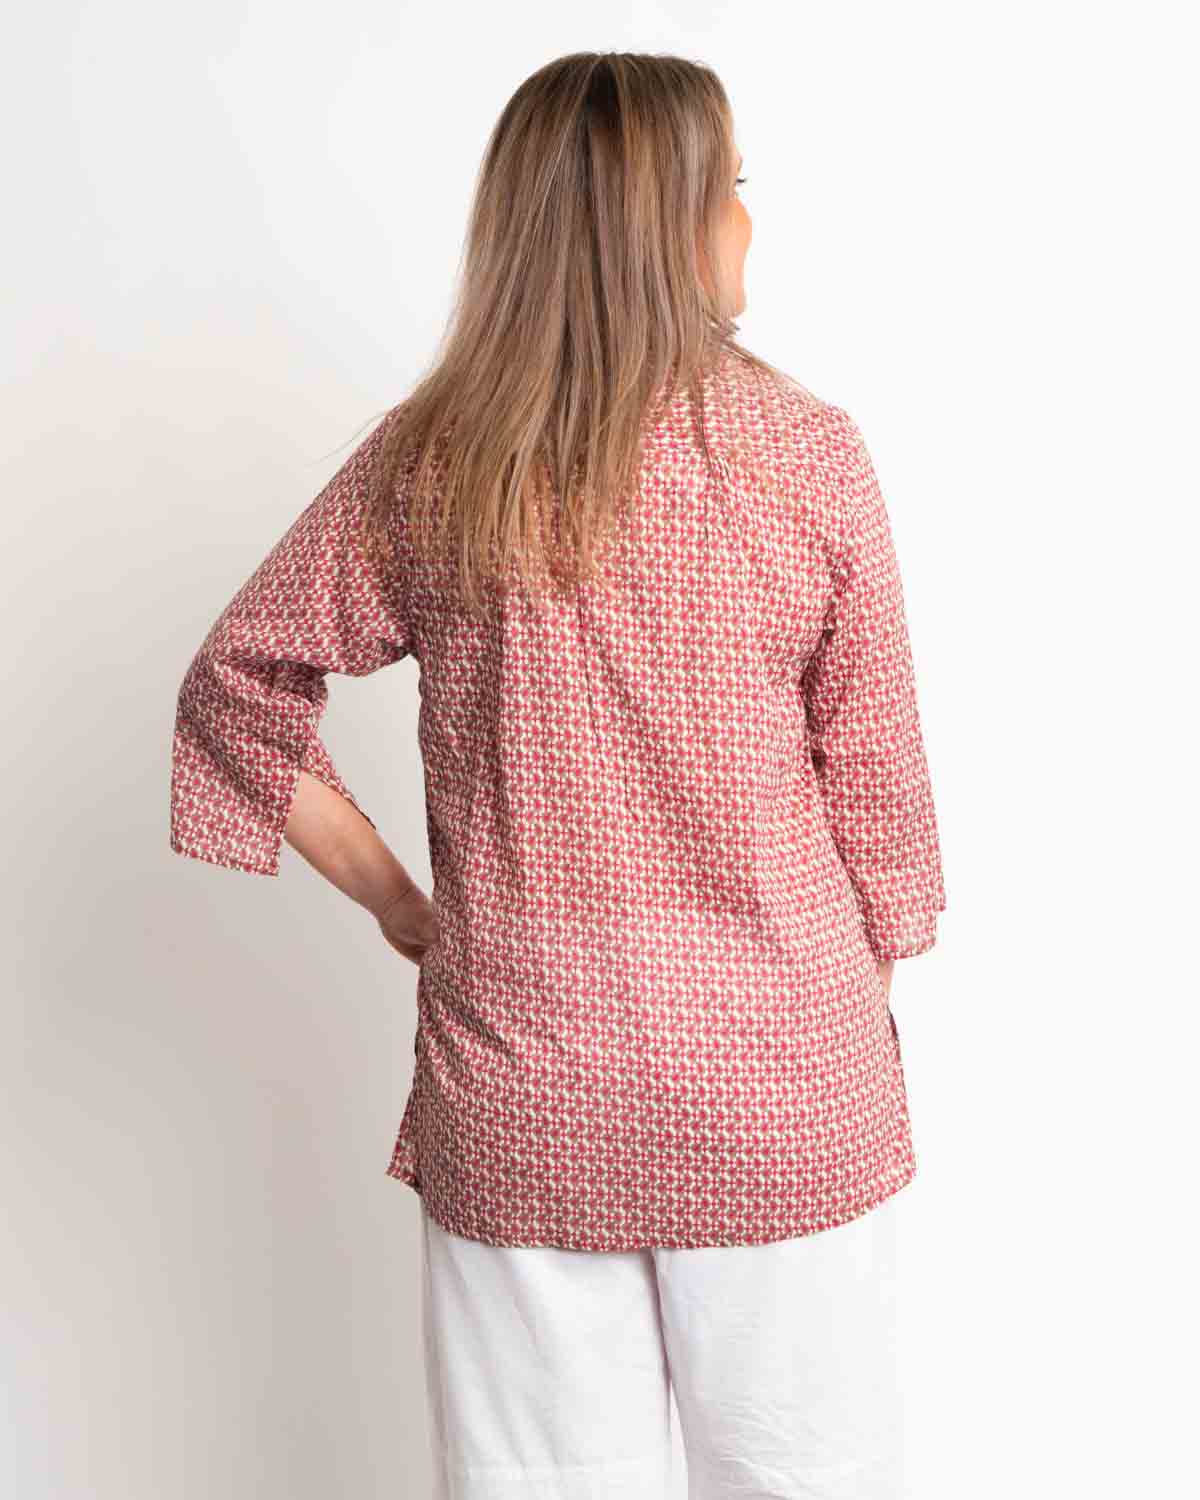 Sleeved and Pleated Summer Top in Ecru Pink